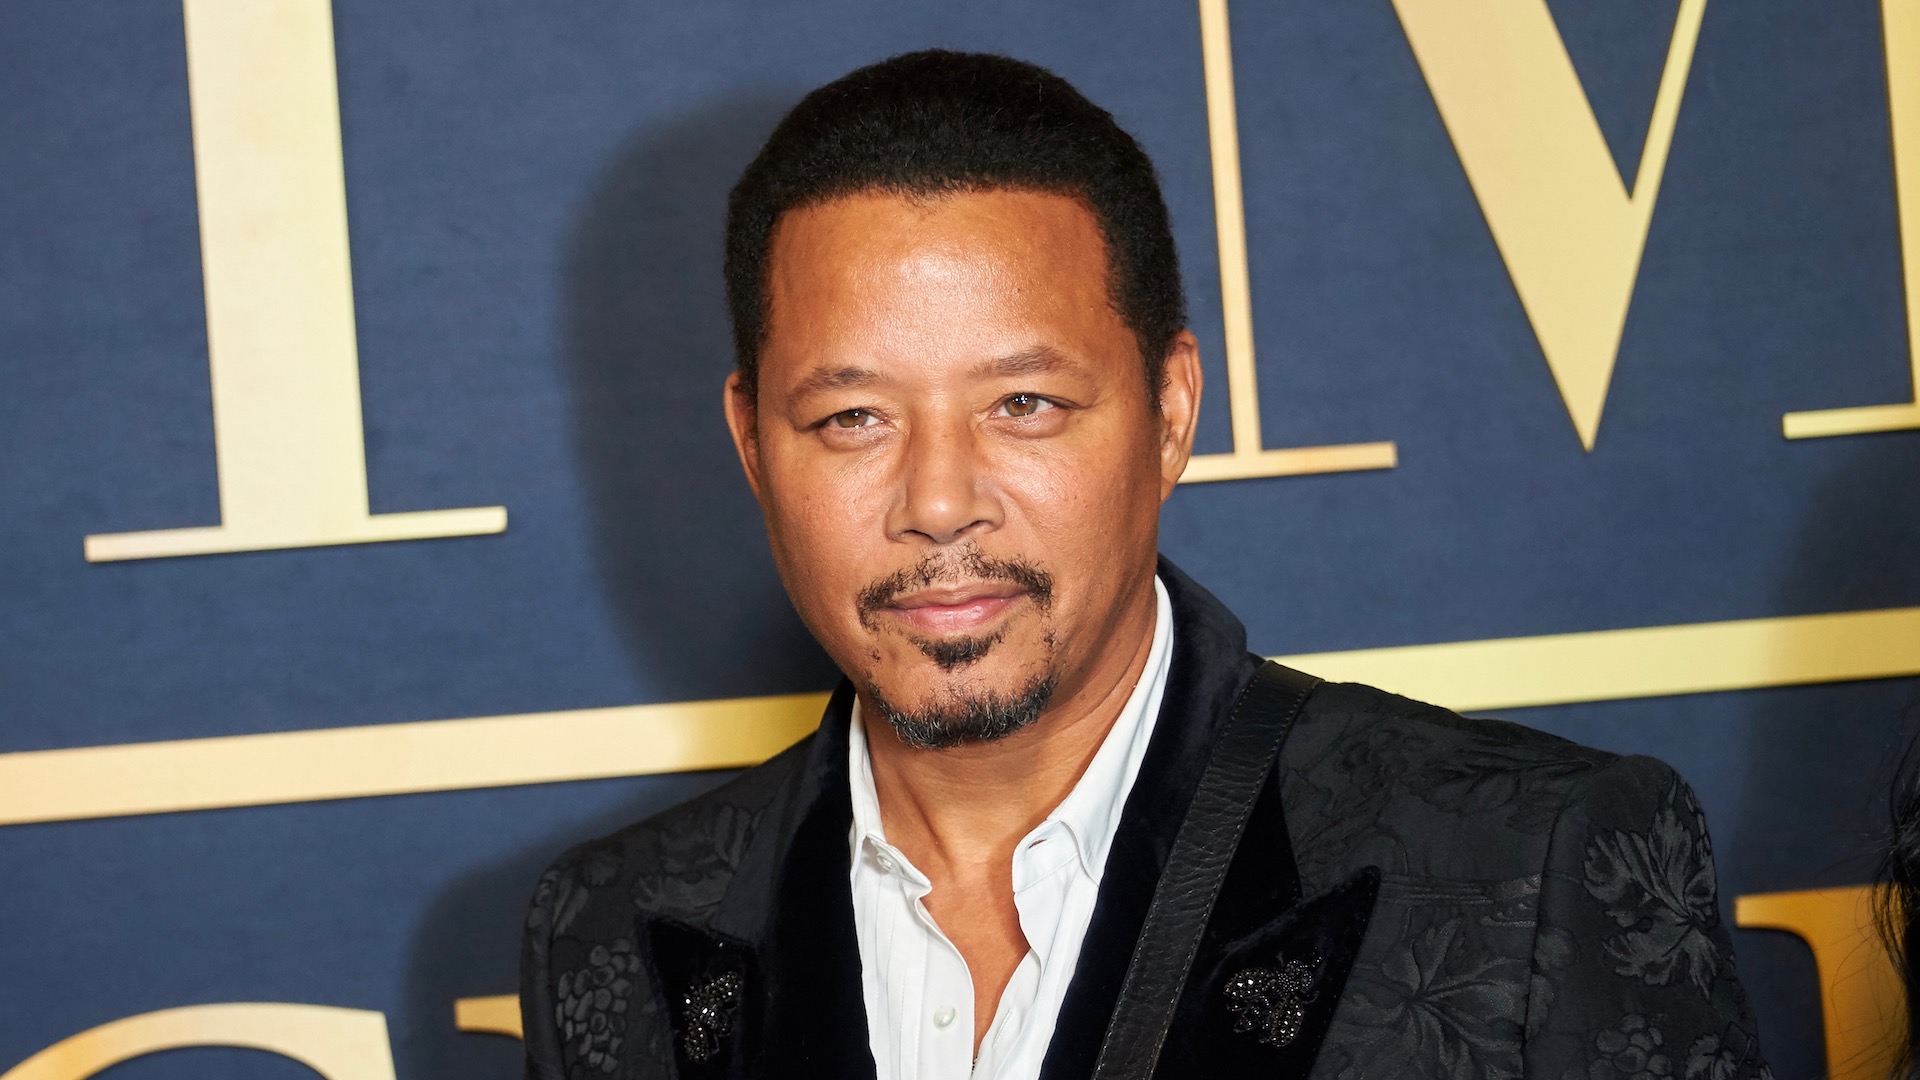 Terrence Howard Reveals He's Retiring: 'This Is the End for Me